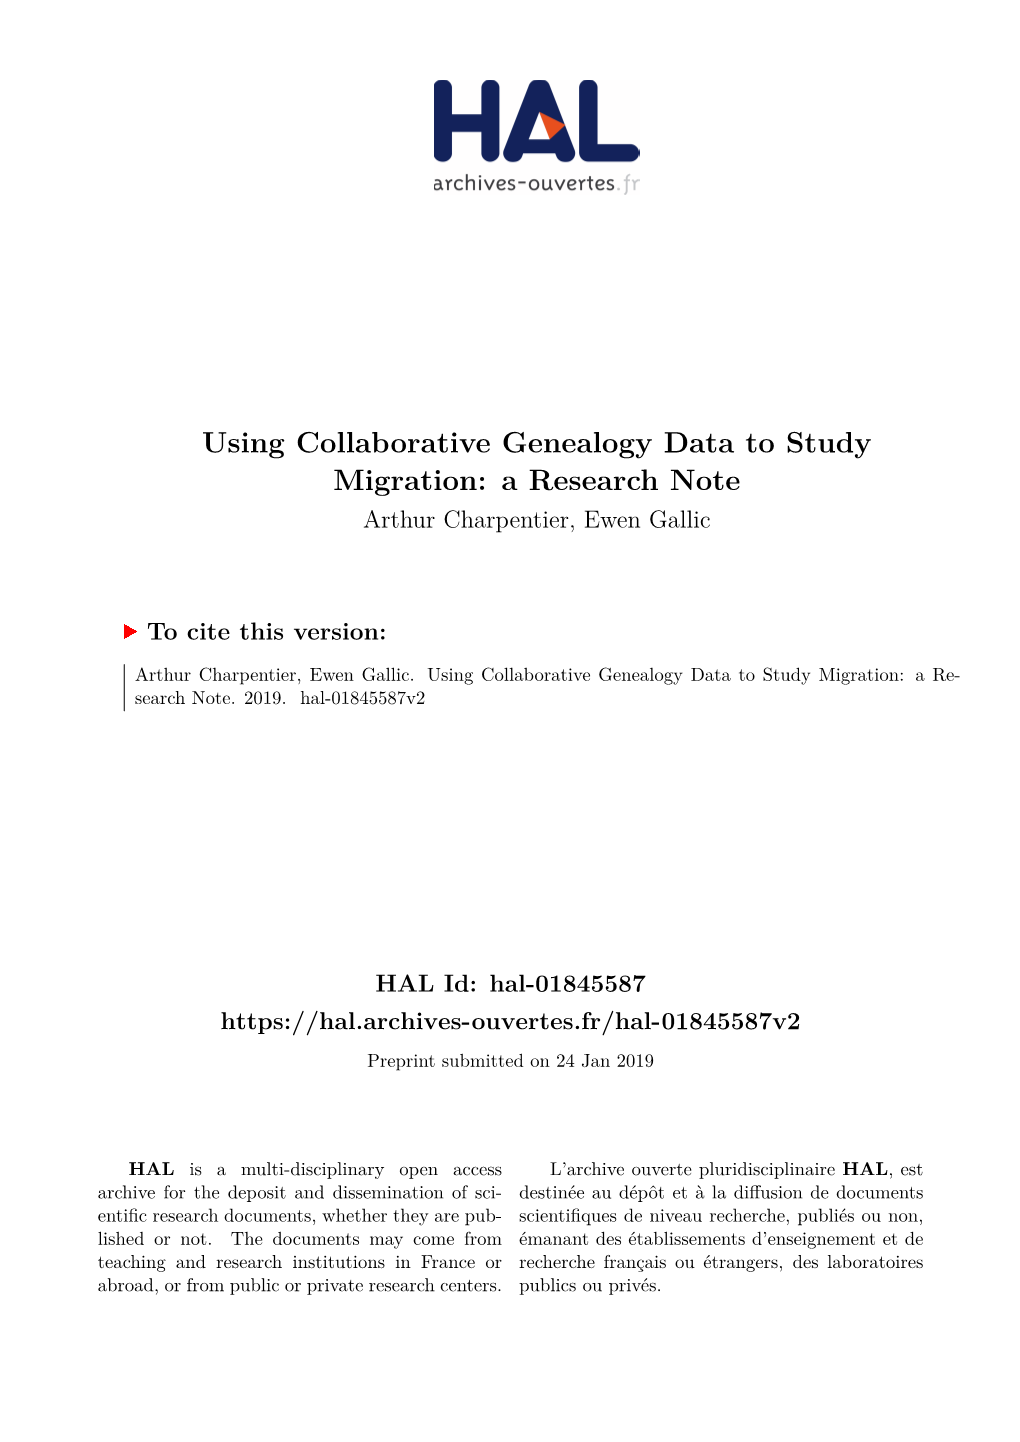 Using Collaborative Genealogy Data to Study Migration: a Research Note Arthur Charpentier, Ewen Gallic